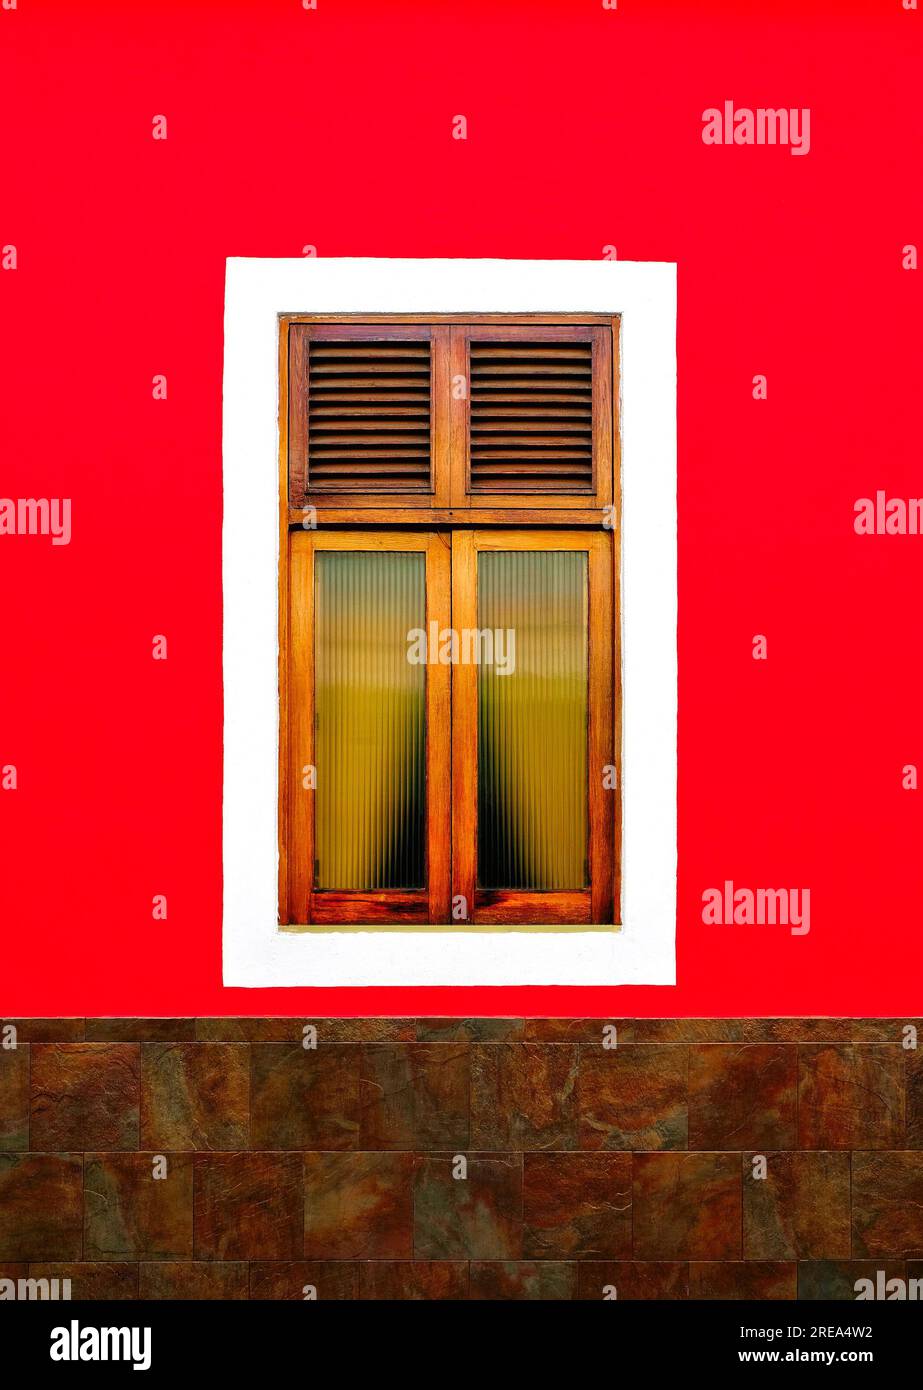 Simple classic wooden window in a bright red wall. Stock Photo